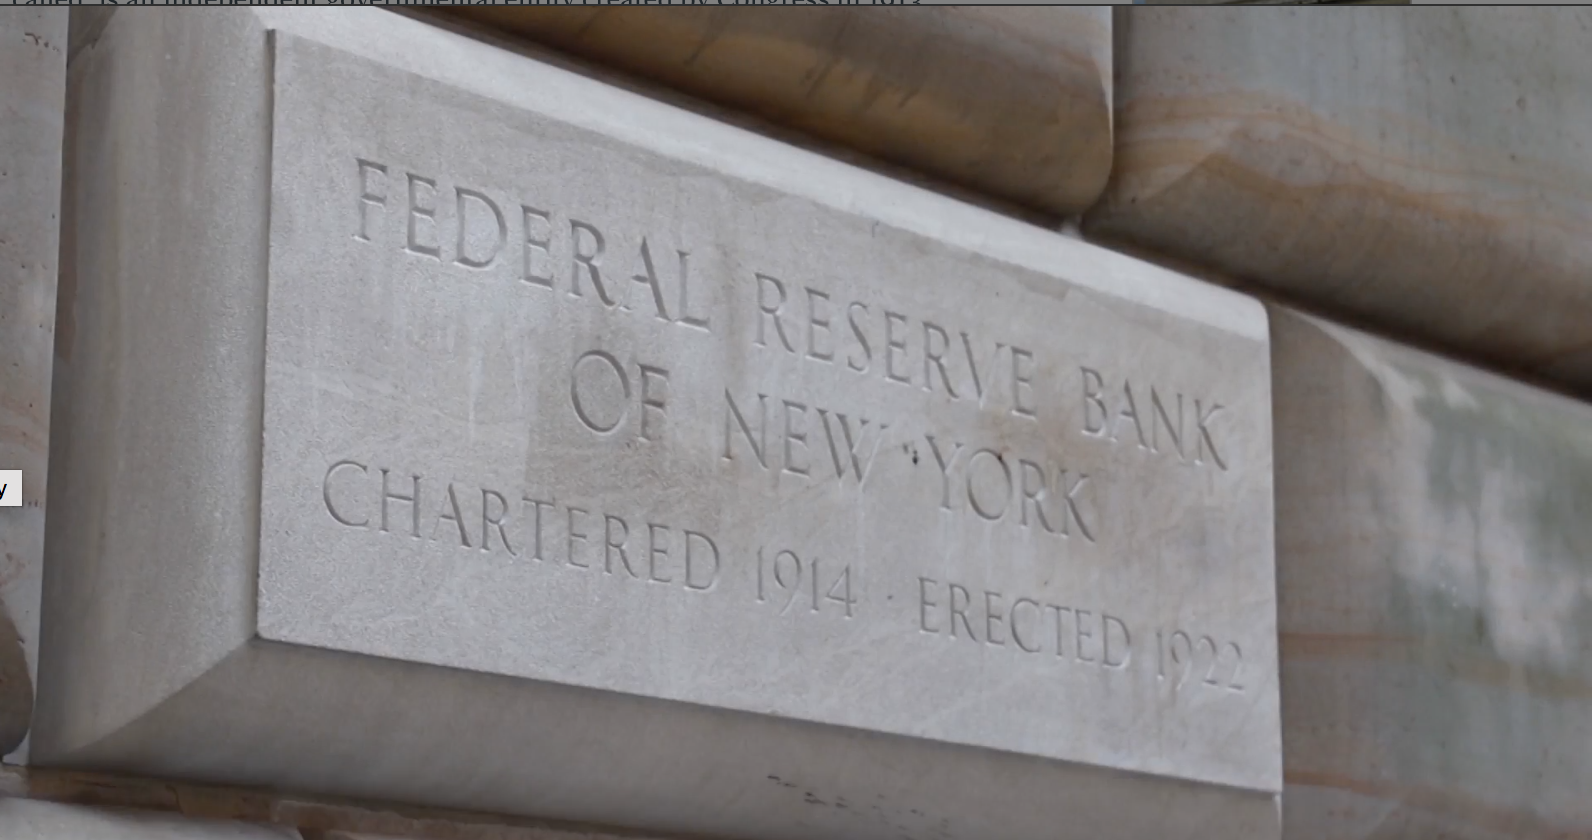 BMCC students have participated in the College Fed Challenge of the Federal Reserve Bank of New York for more than 10 years.